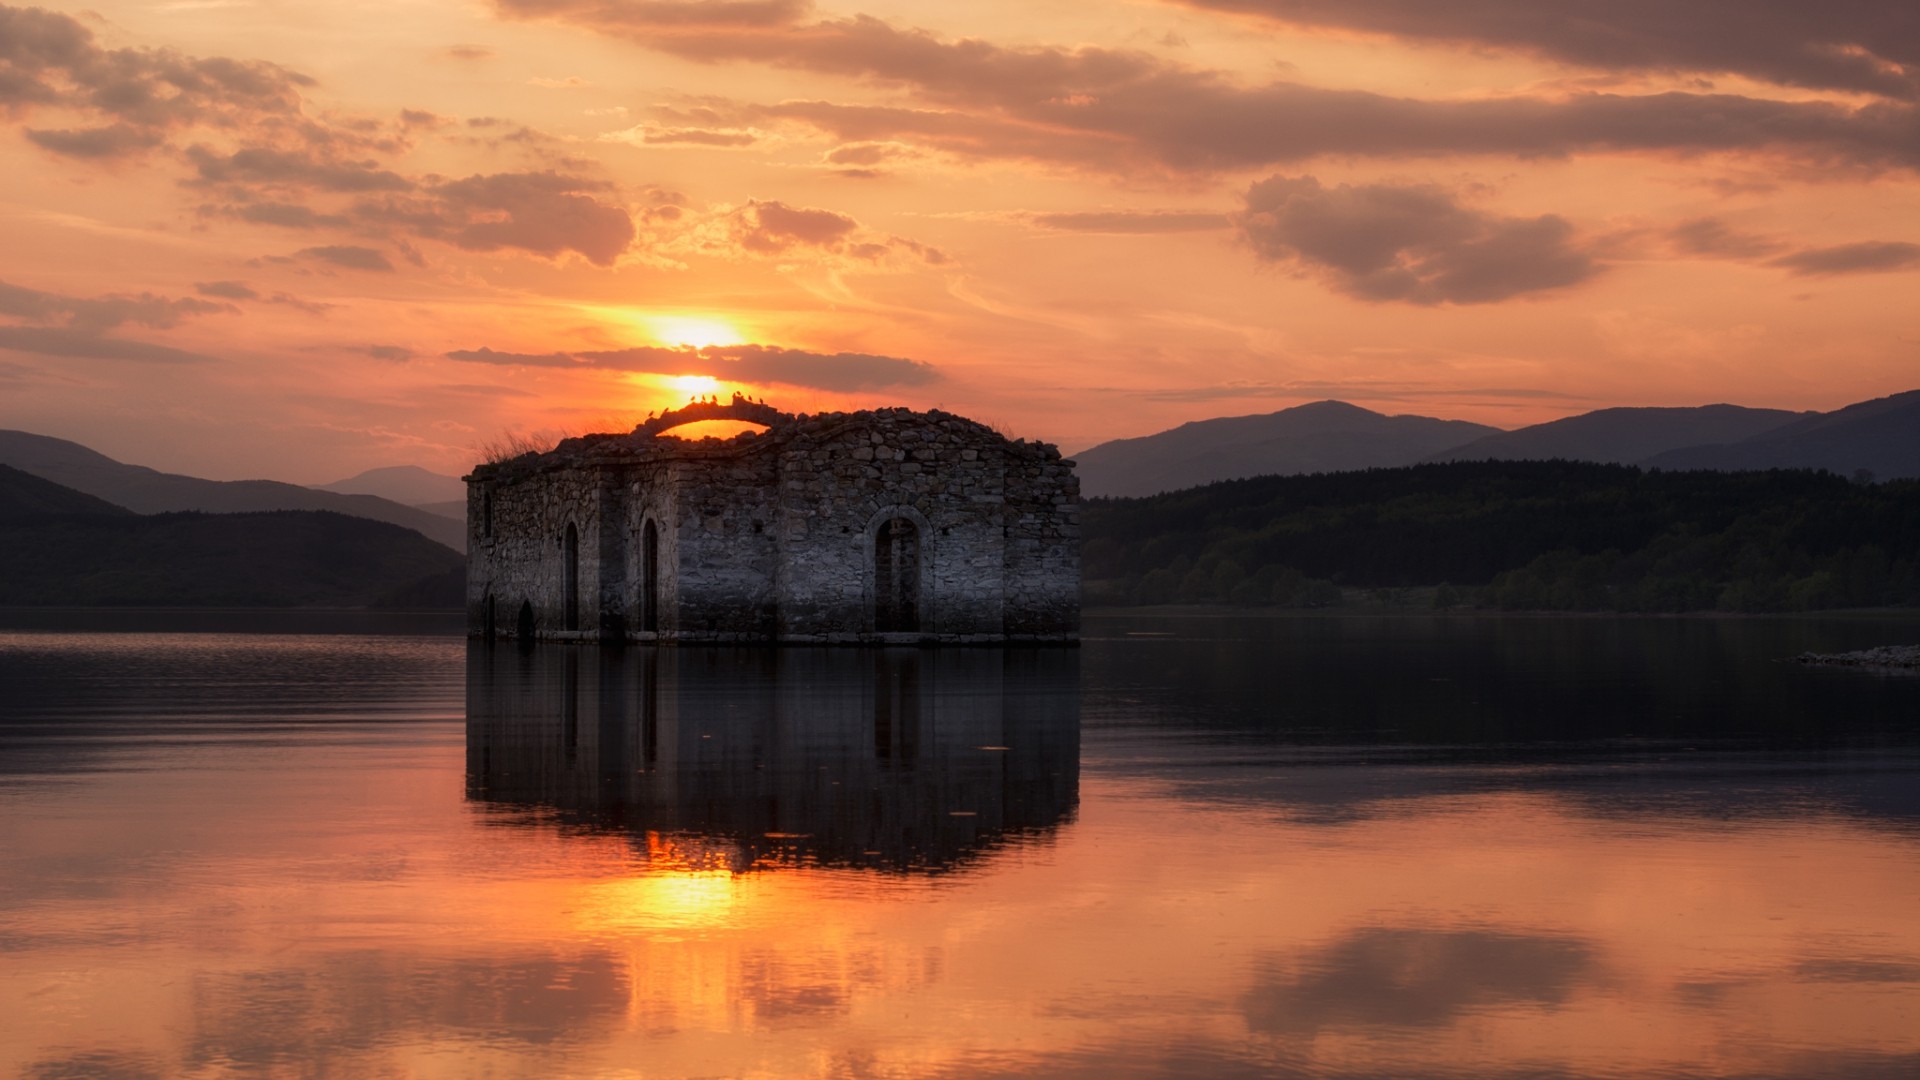 General 1920x1080 nature landscape water Sun reflection clouds Bulgaria lake old building ruins church hills trees forest sunset dam stones birds spring orange sky calm calm waters